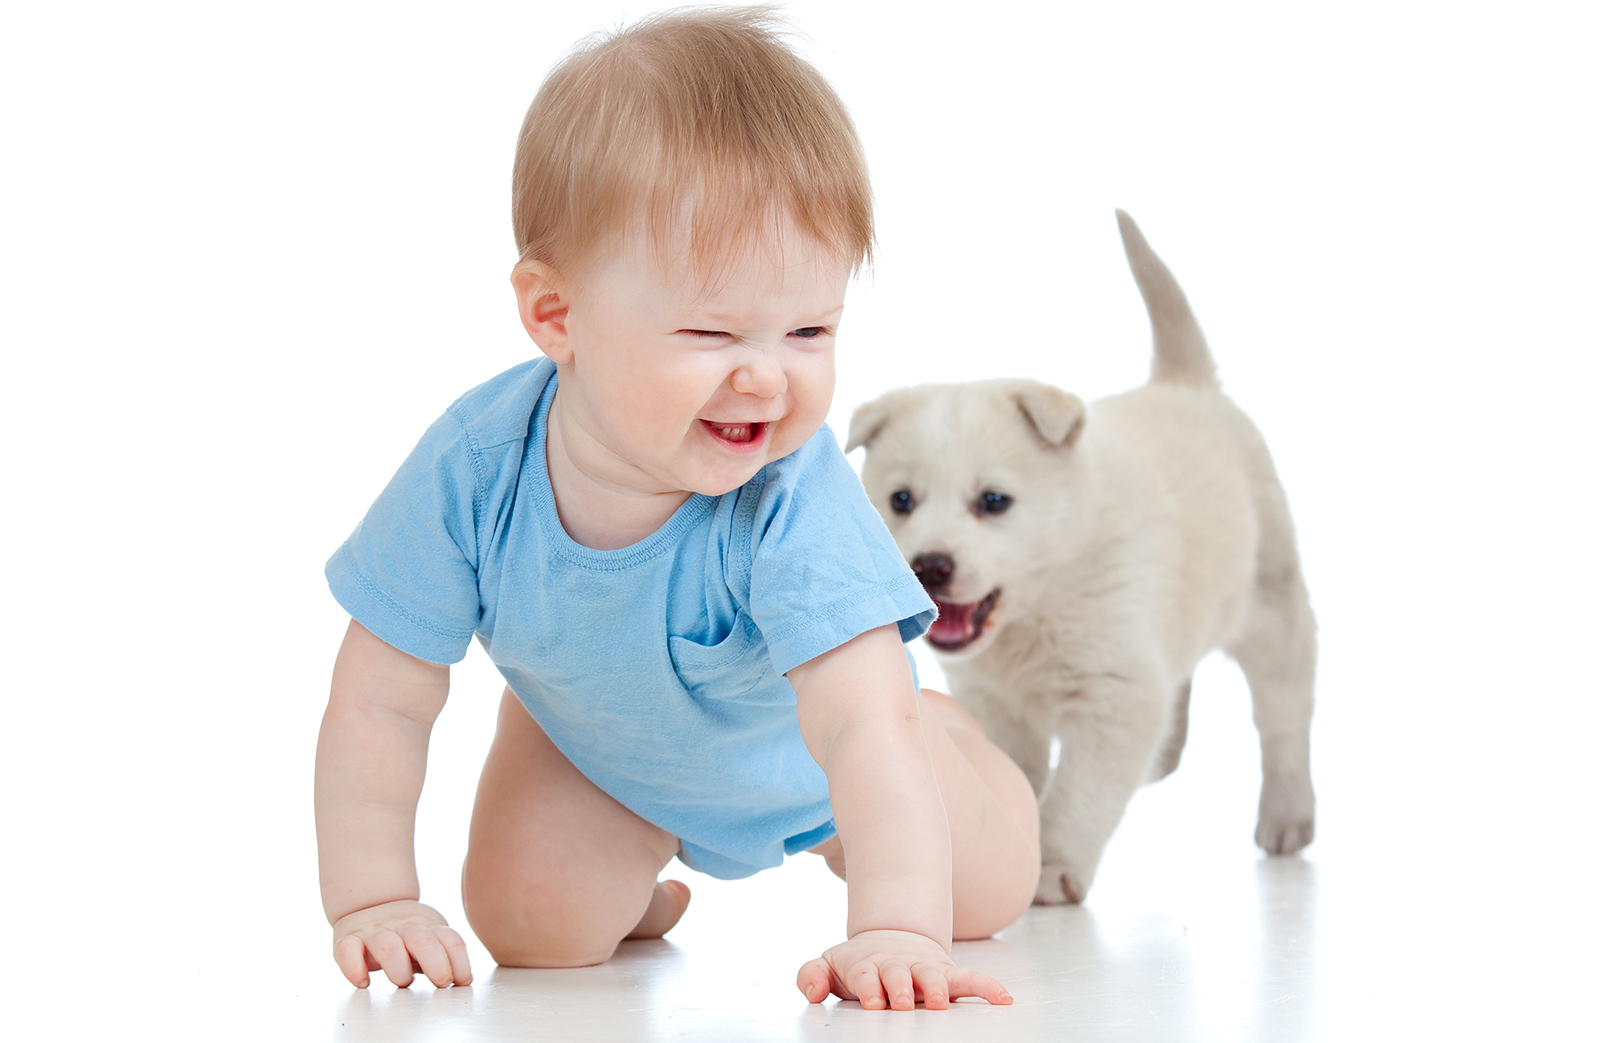 Services for Cleaning Pet Stains Professionally in NJ and PA